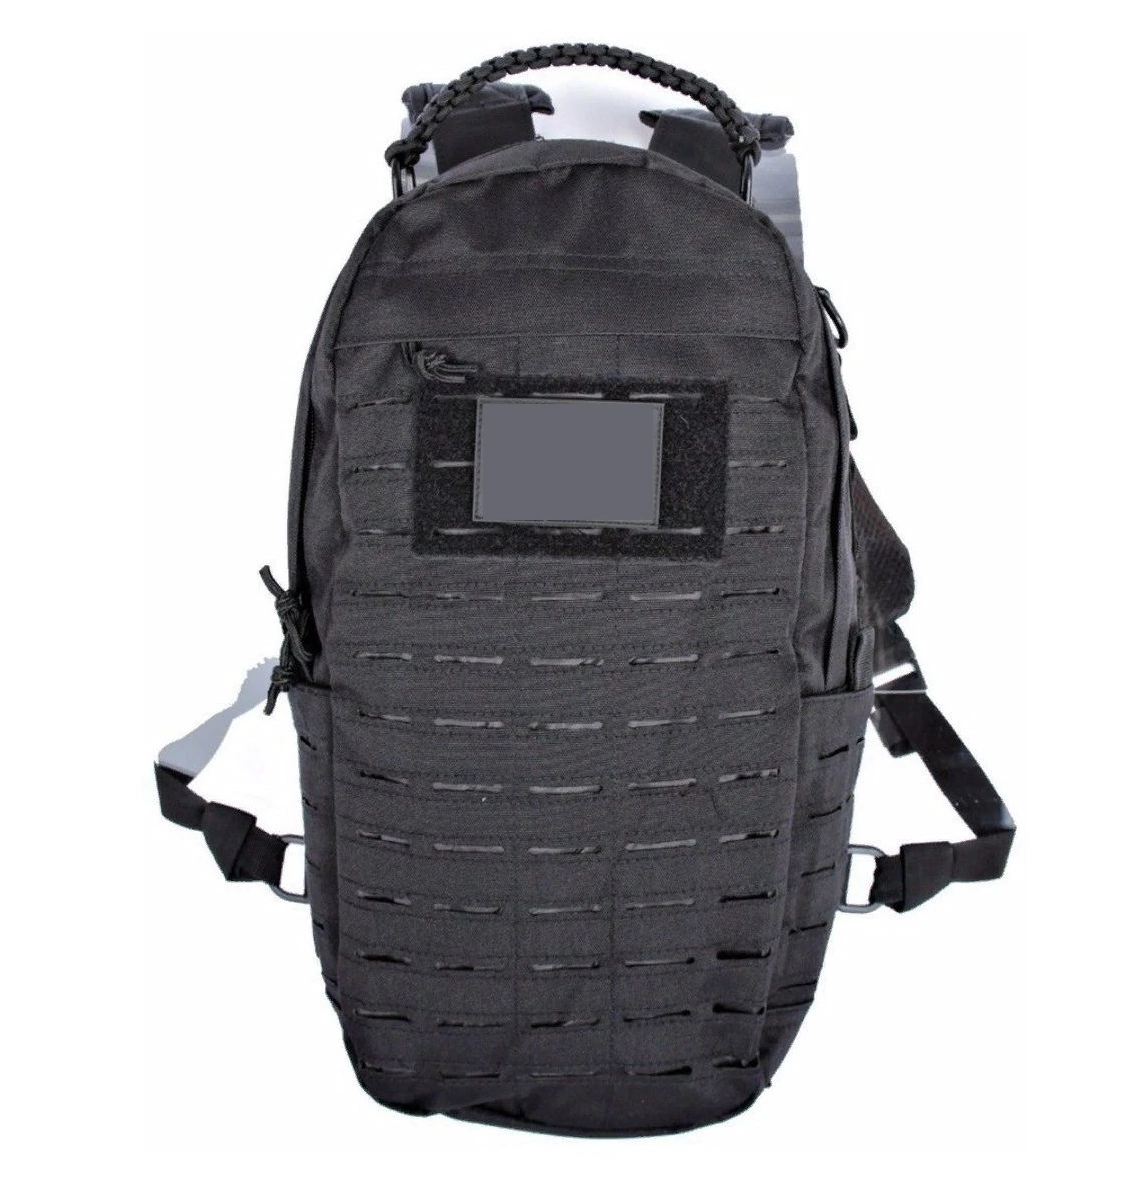 Backpack Recon black